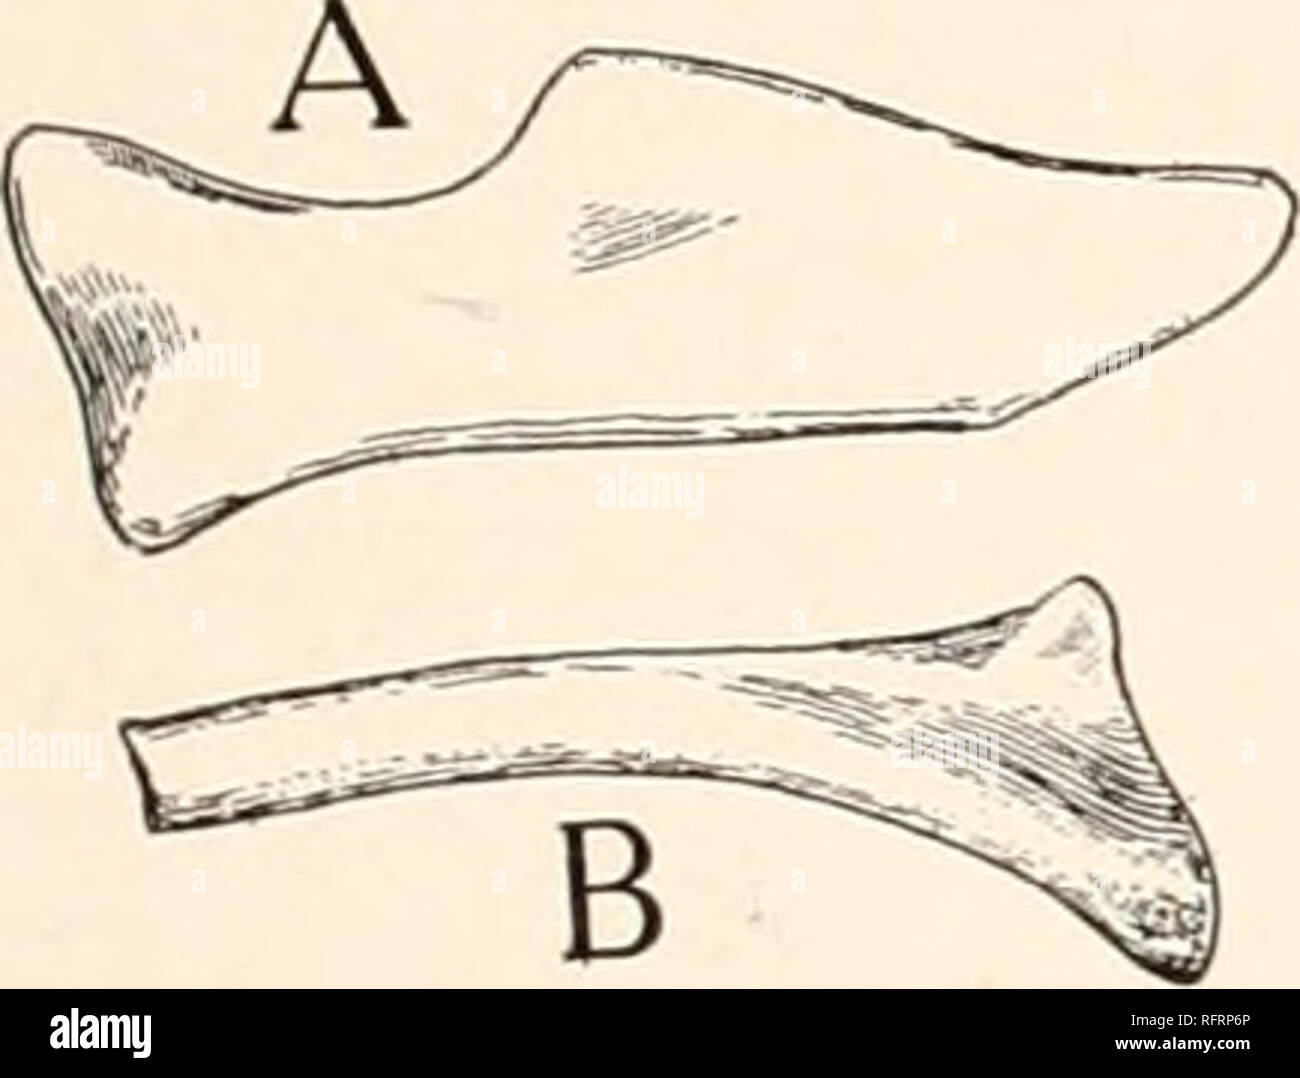 . Carnegie Institution of Washington publication. Fig. 20.—Diasparactiis zenos Case. Lateral view of the ninth to tlie twenty-third cau- 3- From this point back the character of the vertebrae changes regularly and very slightly. The last trace of a rib is seen on the eleventh or twelfth. The sixteenth and seventeenth still have well-formed netiral arches located on the anterior half of the centrum; the posterior zygapophyses are elongated. From this point back to the twenty-third, the last preserved, the neural spines are low, almost rudi- mentary, and the zygapophyses are elongated, interlock Stock Photo